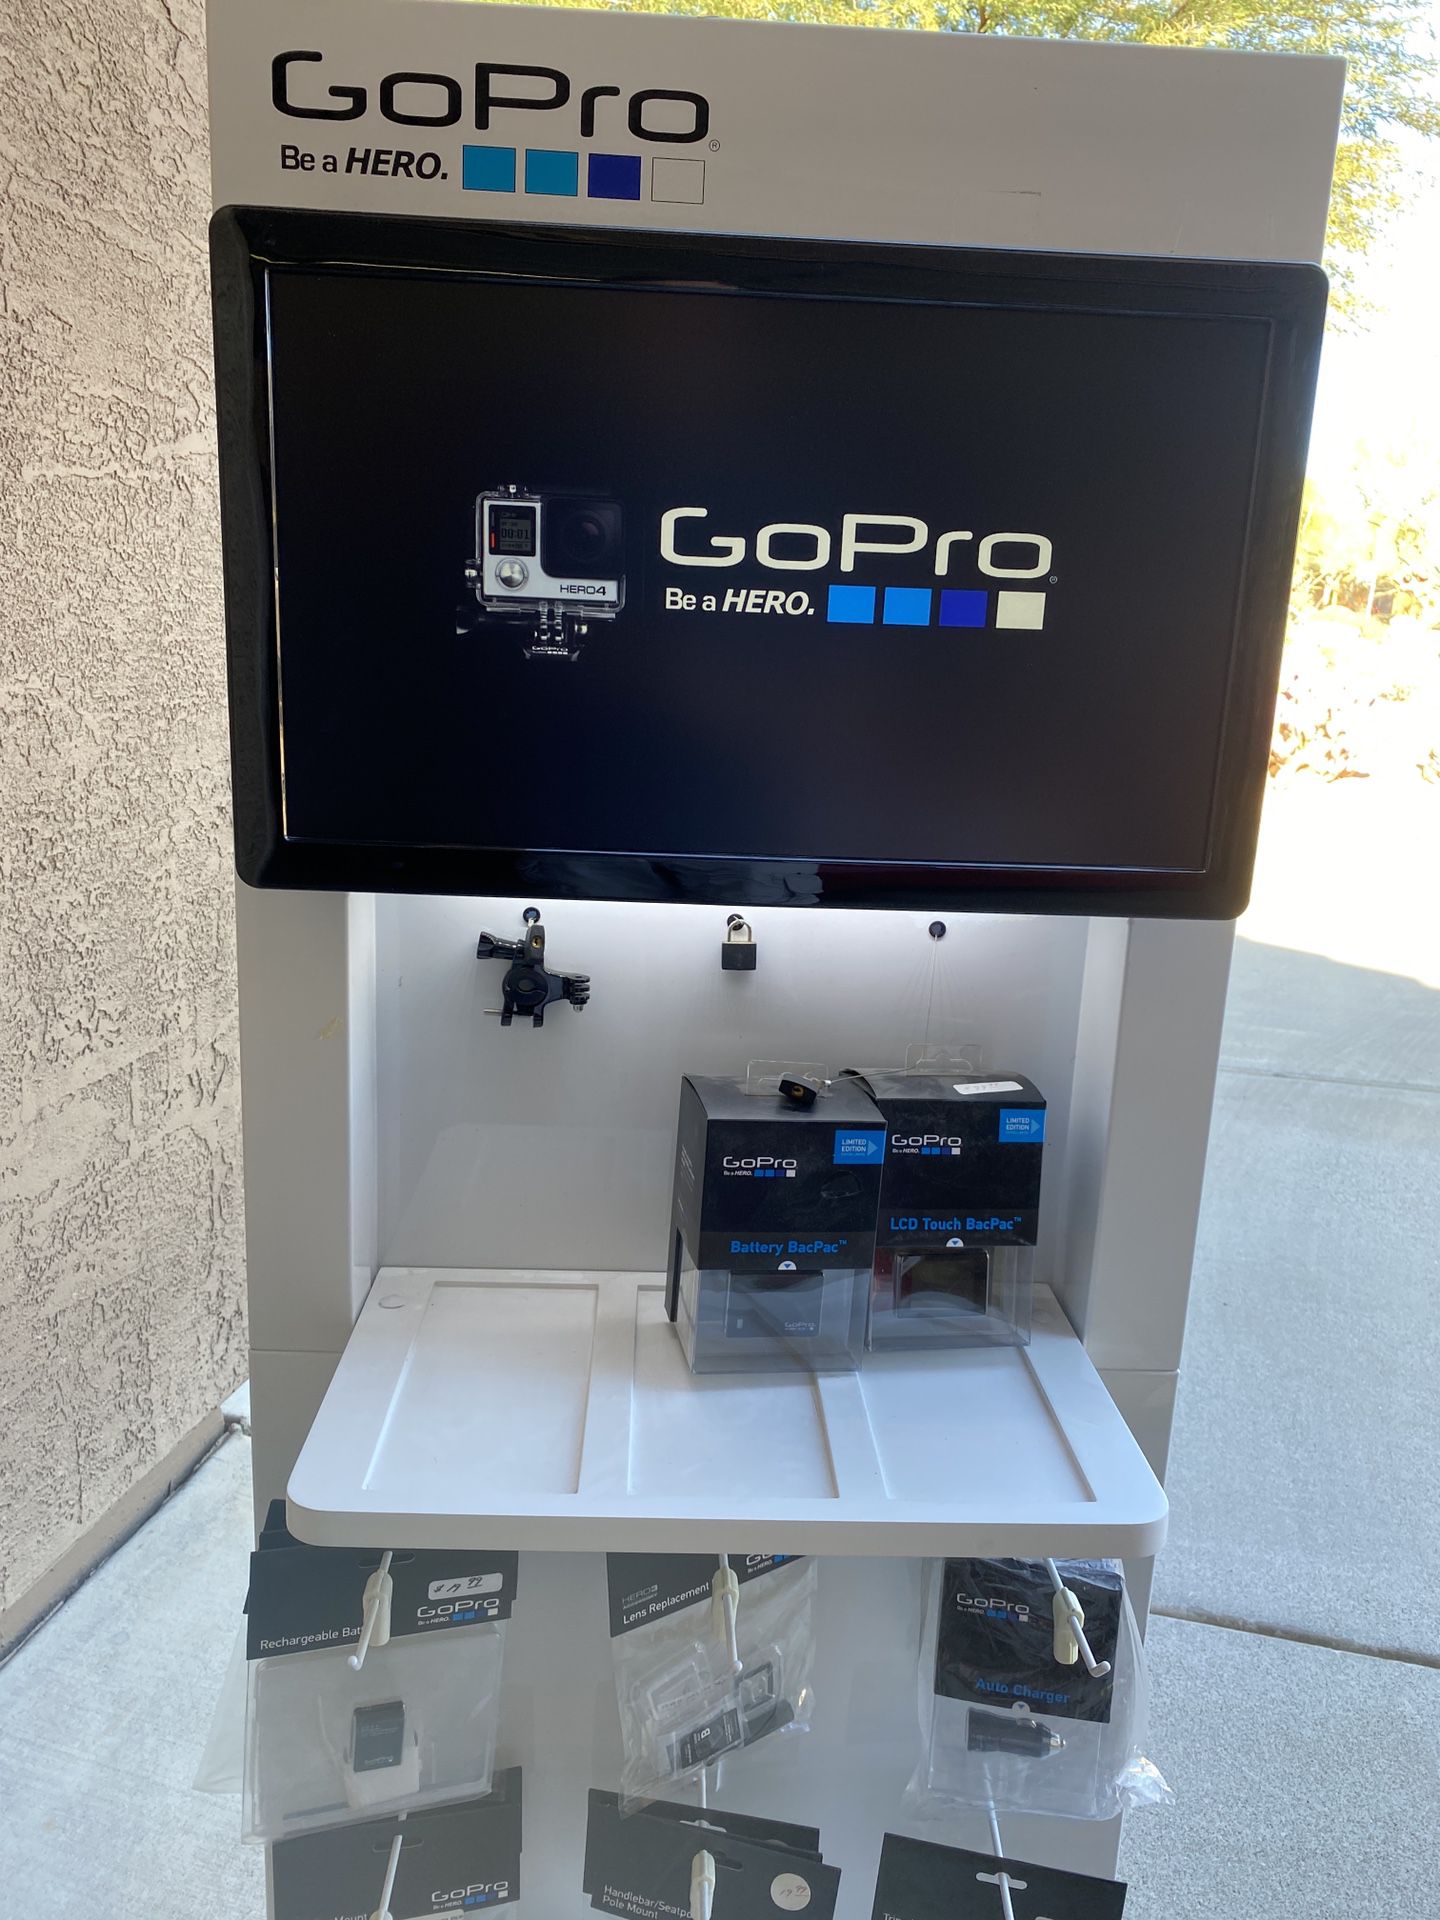 GoPro Retail Product Display Unit with Product